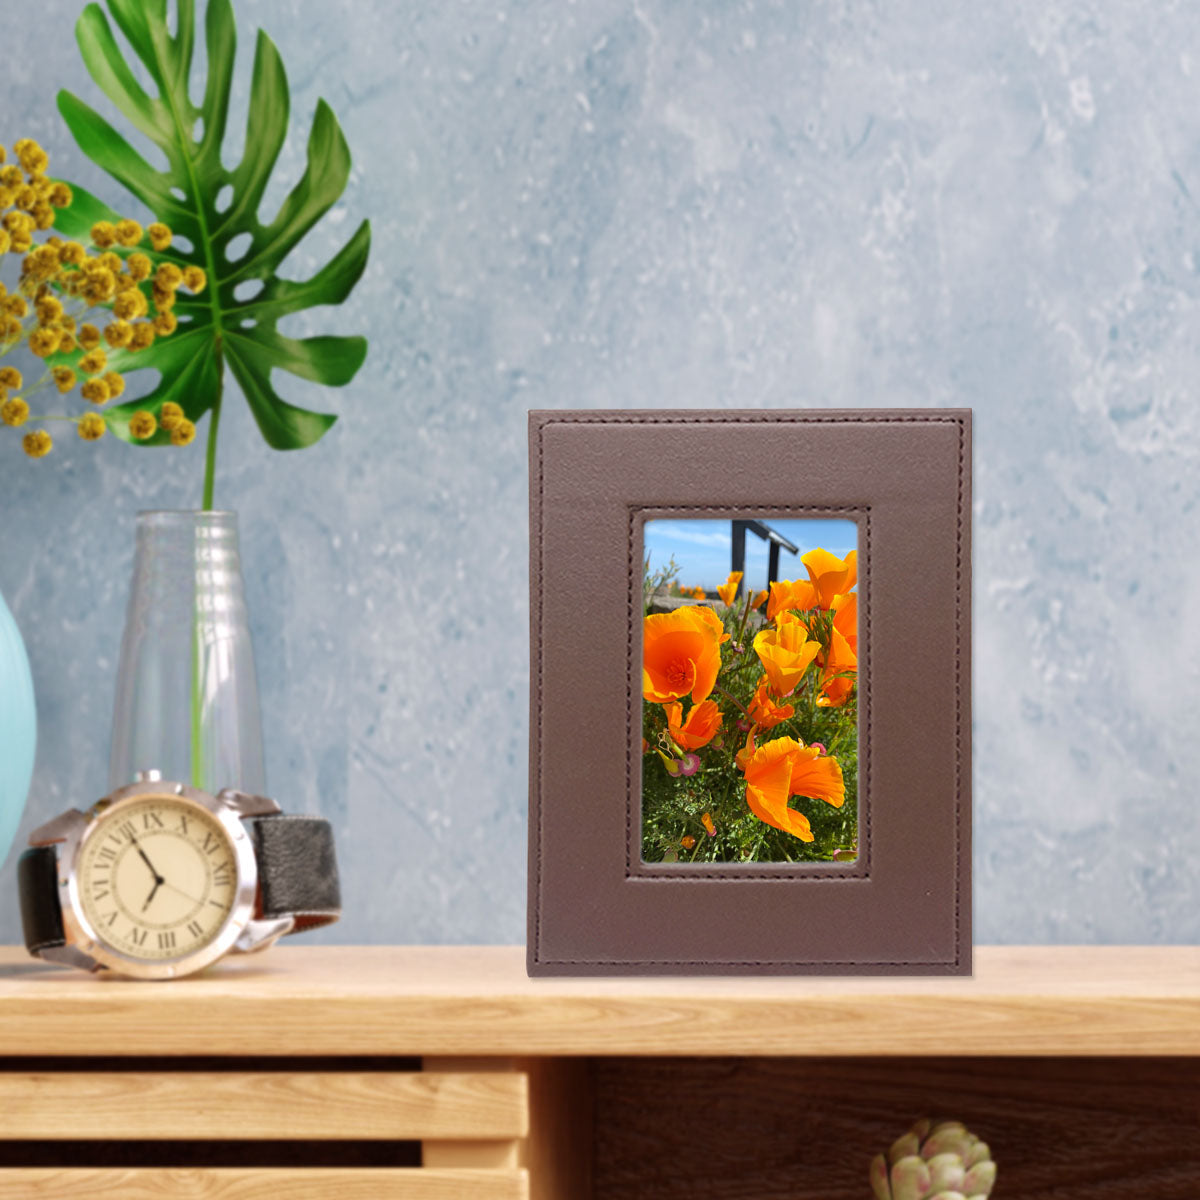 Faux Leather Photo Frames (set of 3)